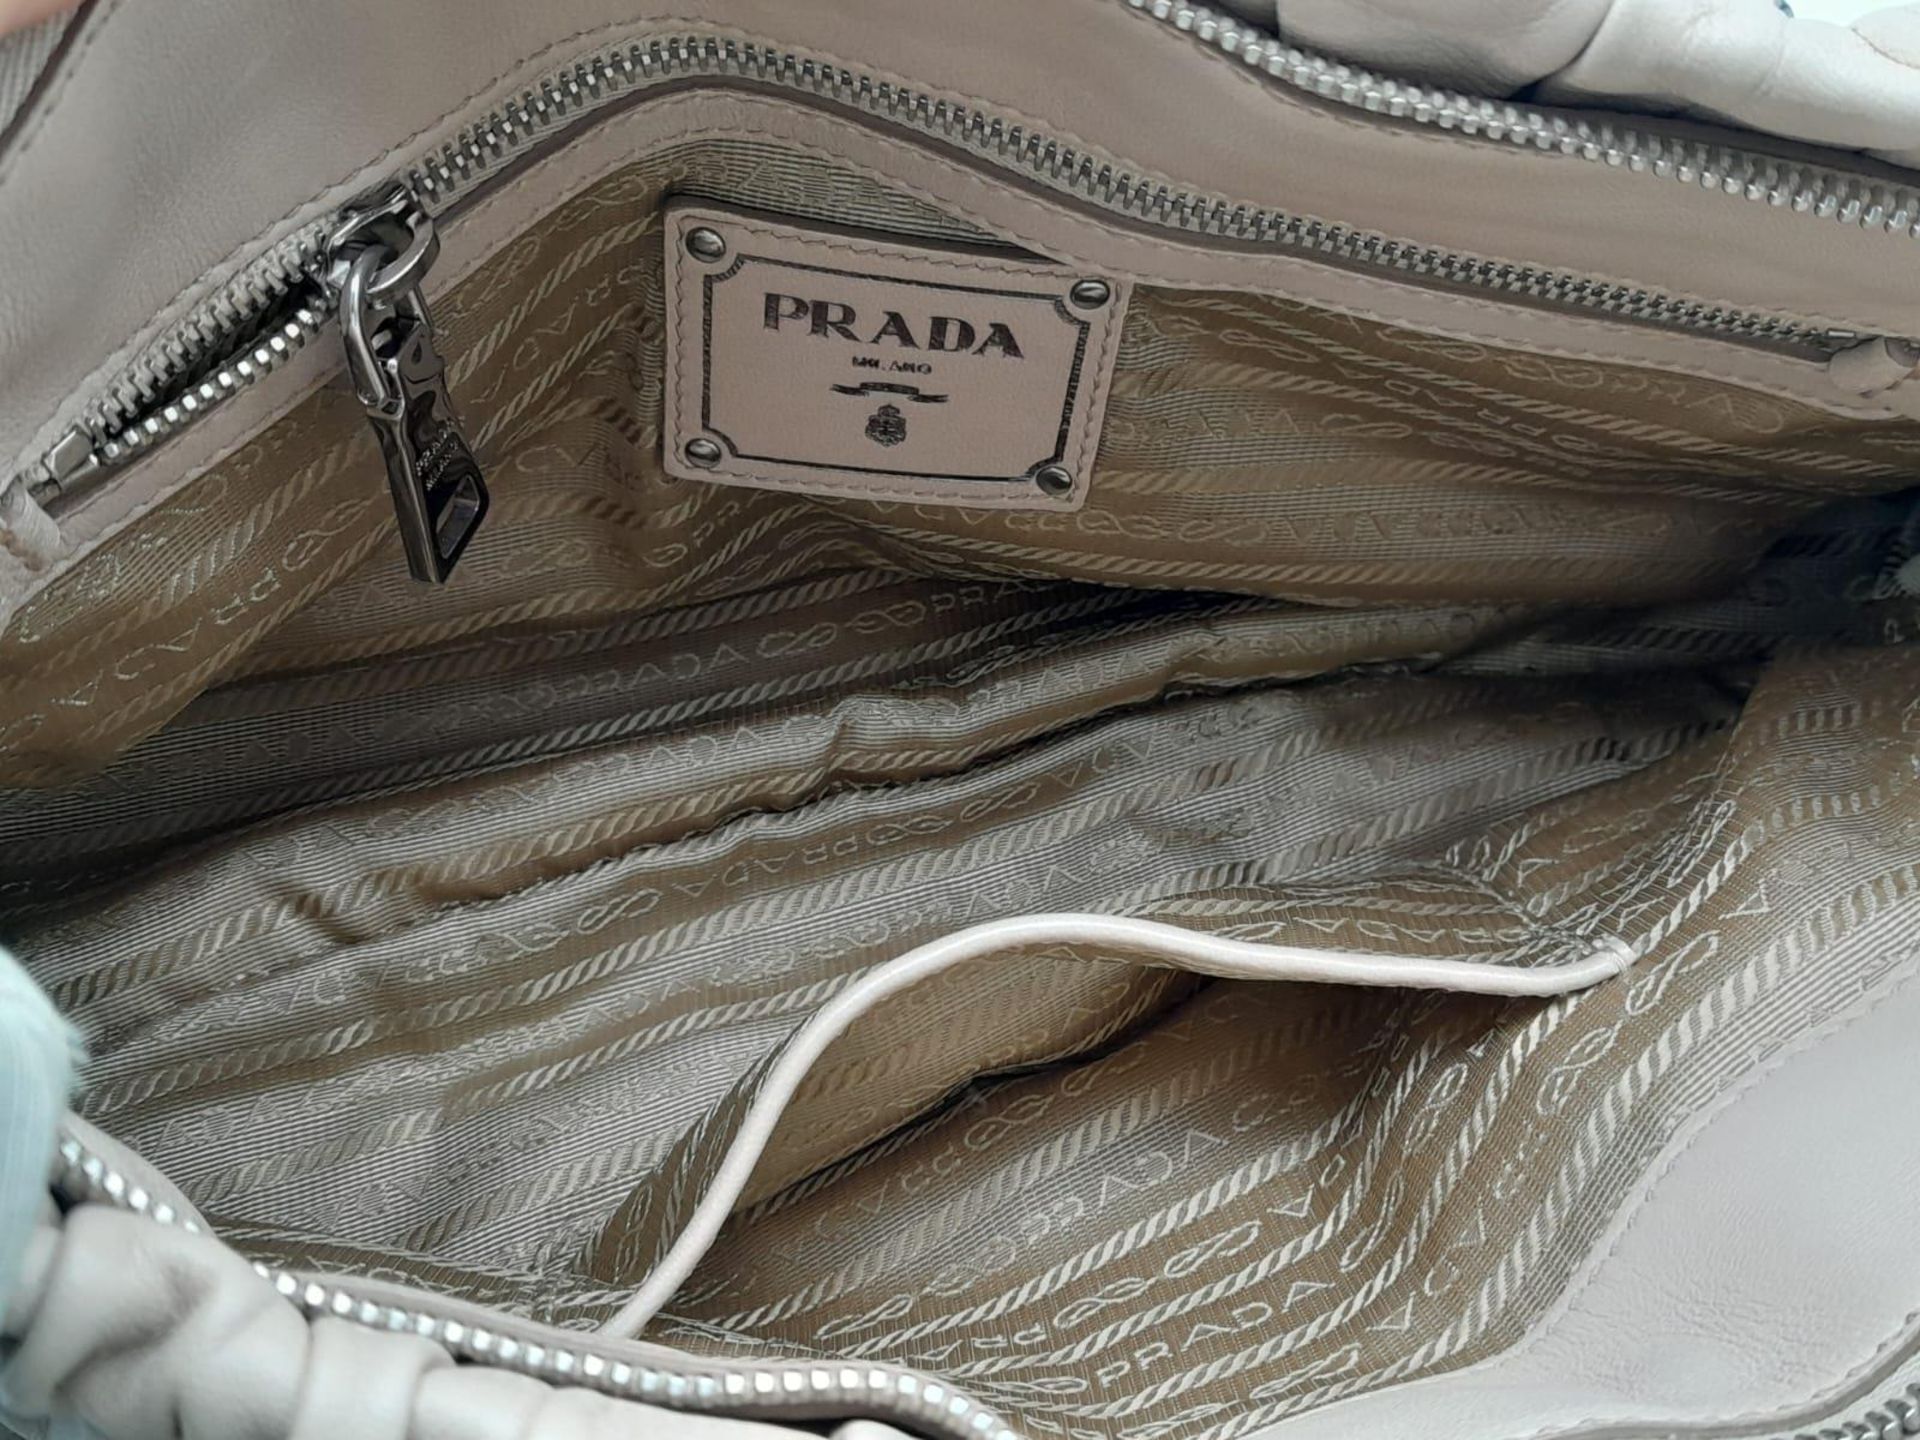 A PRADA BEIGE NAPPA LEATHER GAUFRE POMICE TOTE BAG. SILVER TONE HARD WEAR INCLUDING BUCKLE DETAIL. - Image 26 of 27